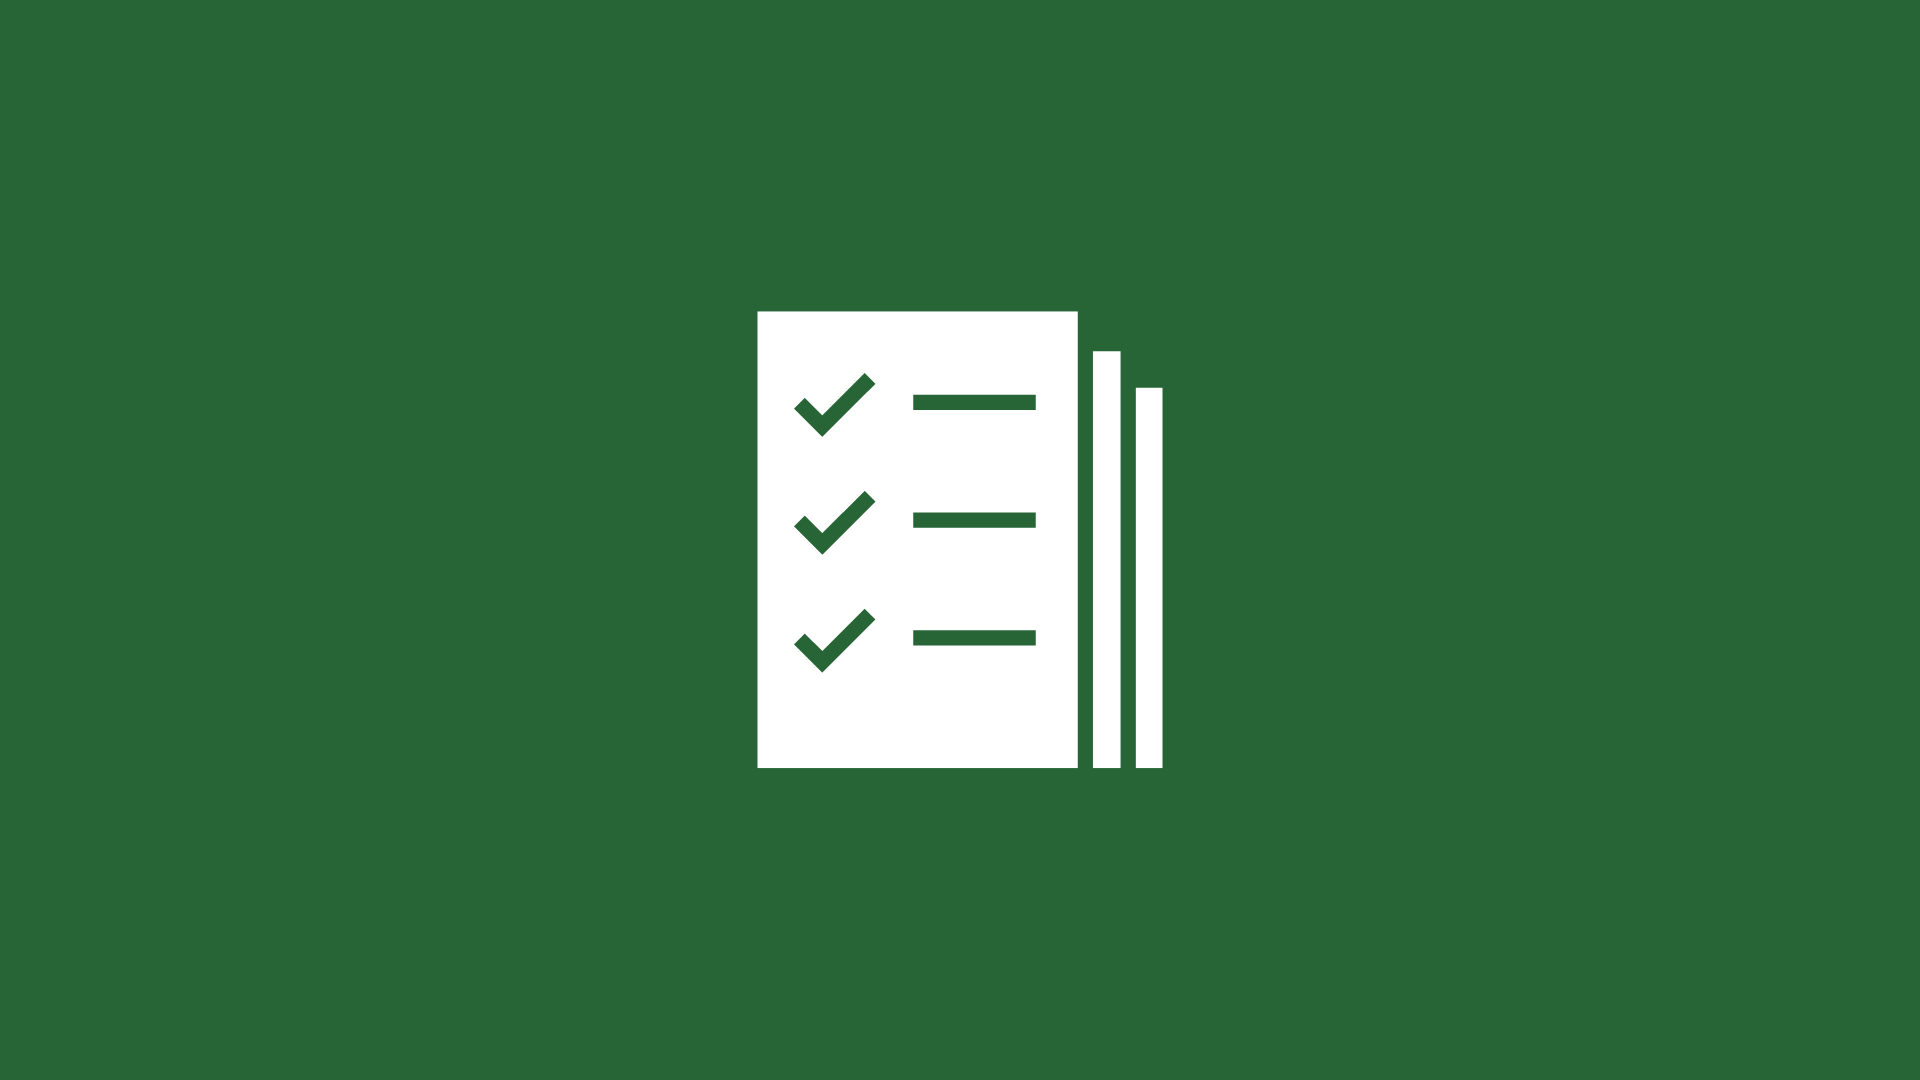 Icon of a bulleted list